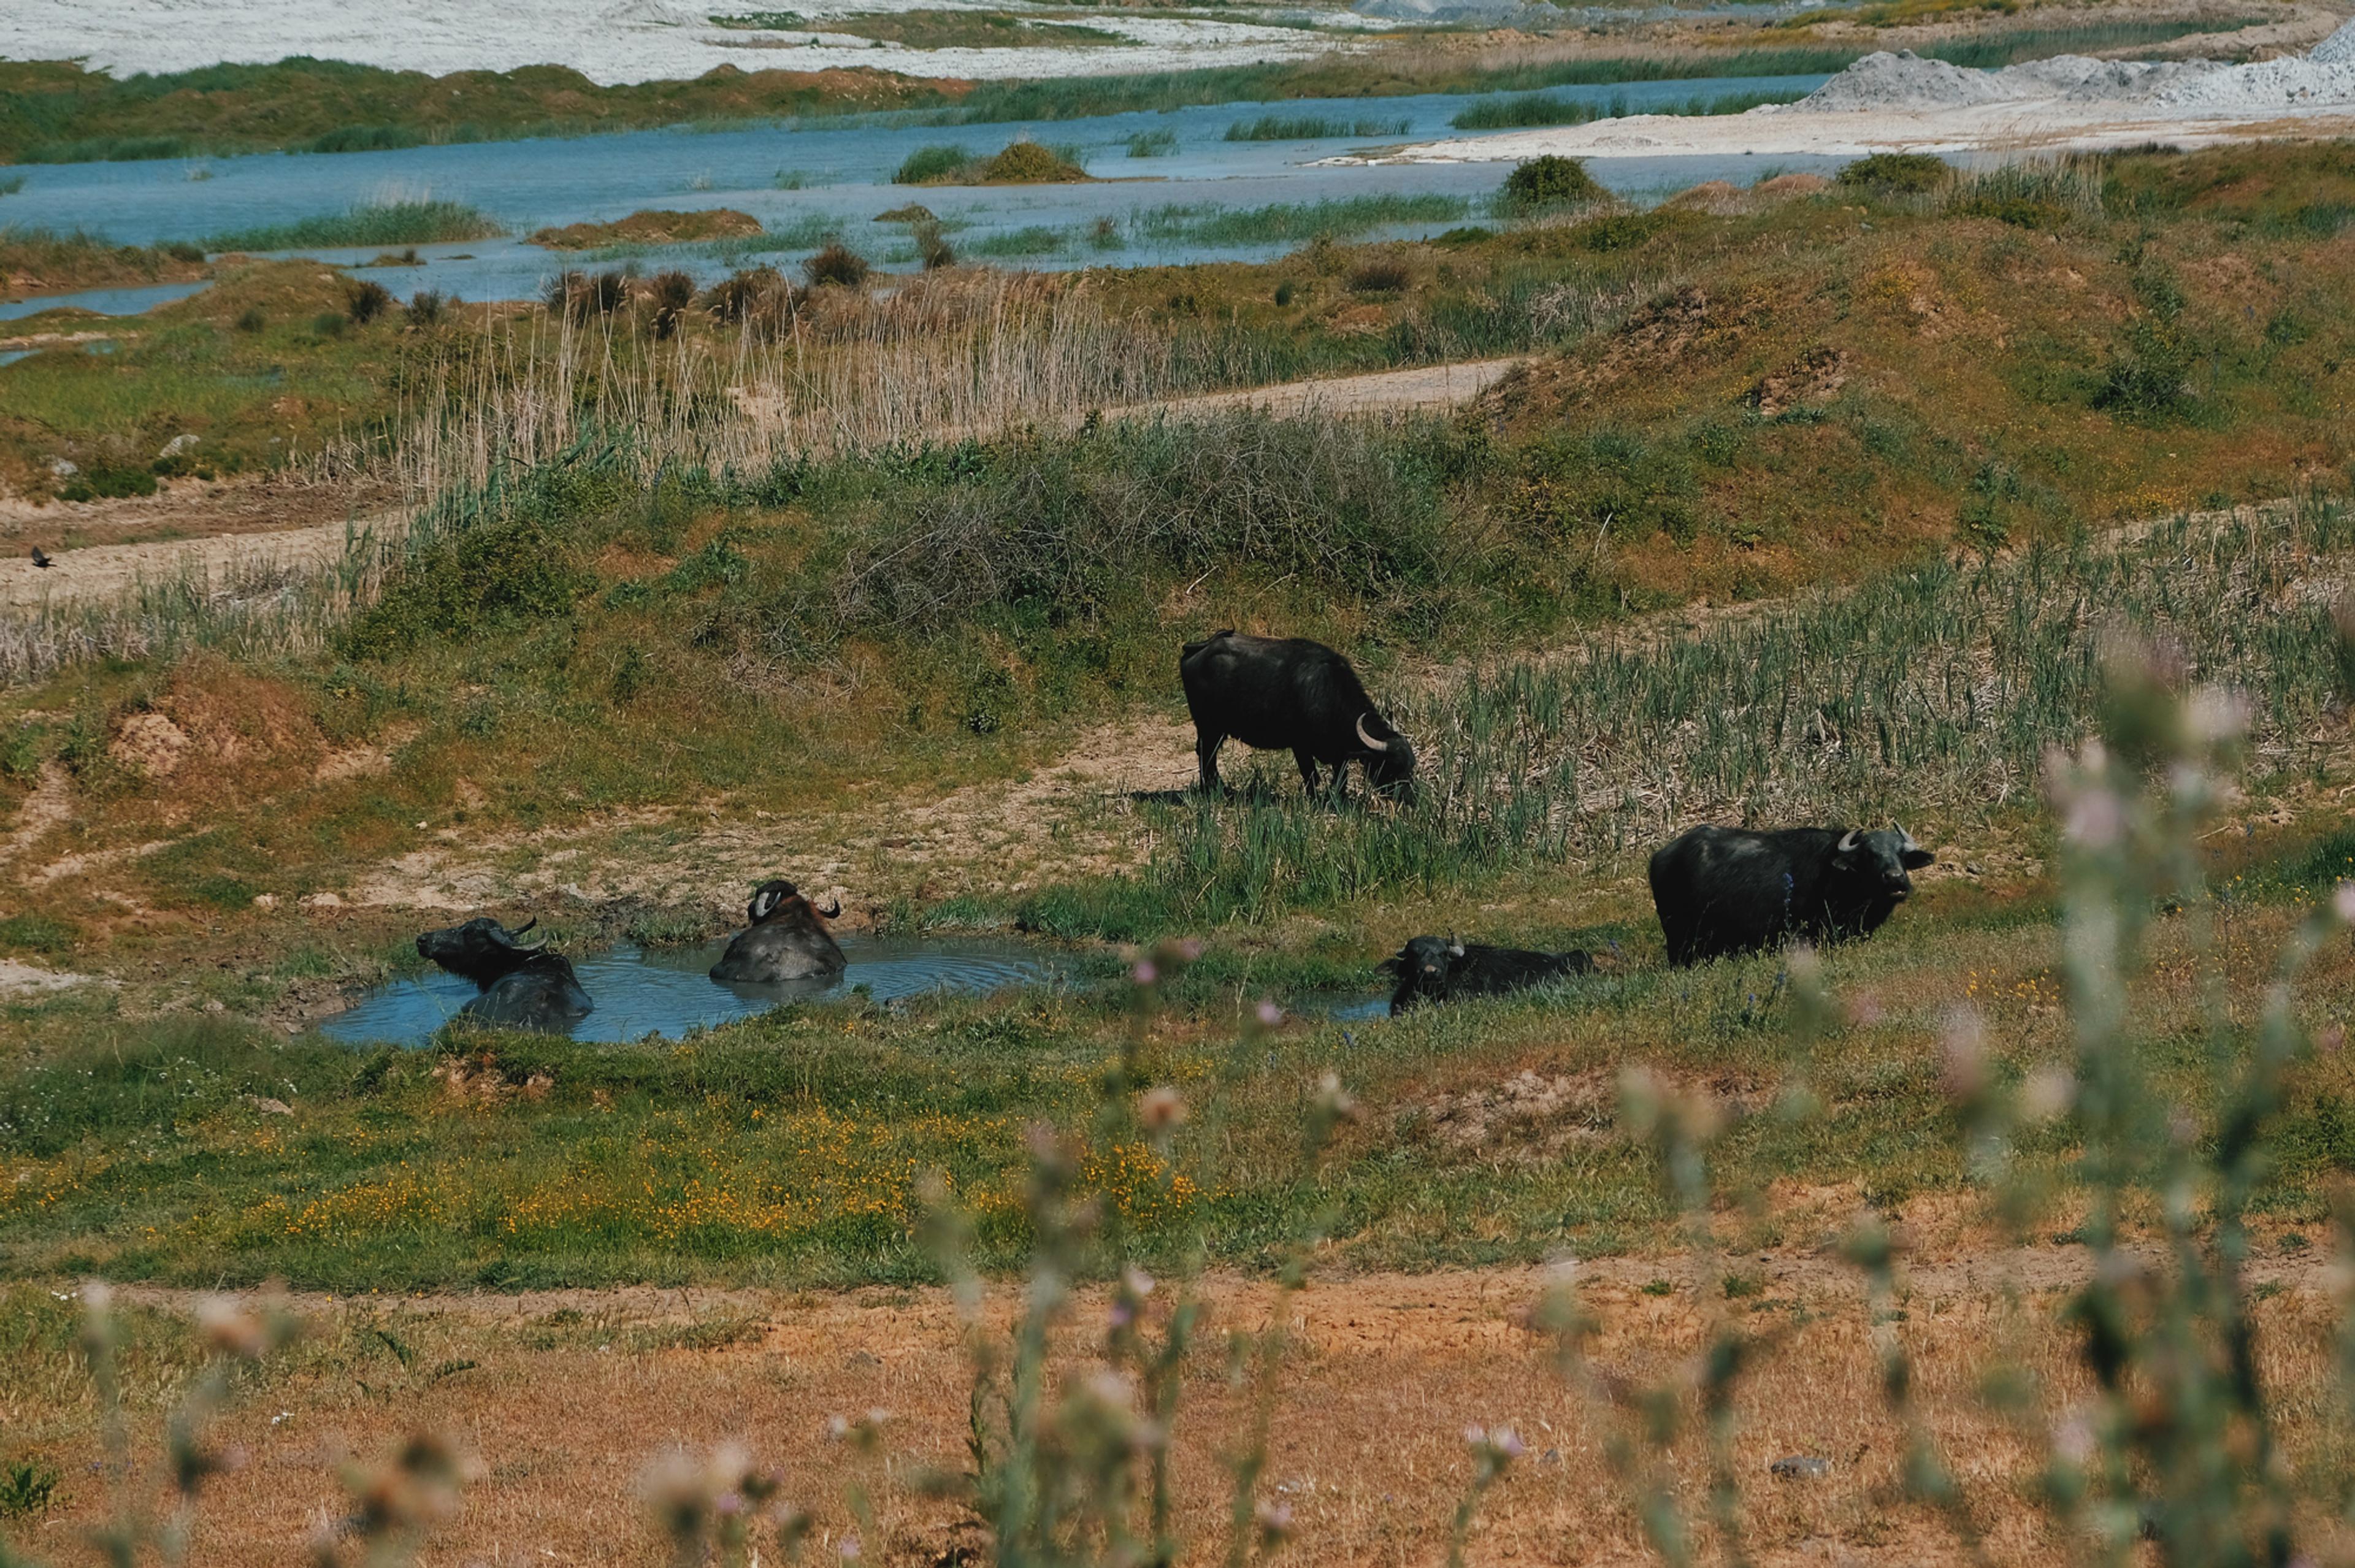 Water buffalo enjoy bathing in wallows amidst the encroaching urbanisation in the outskirts of Istanbul